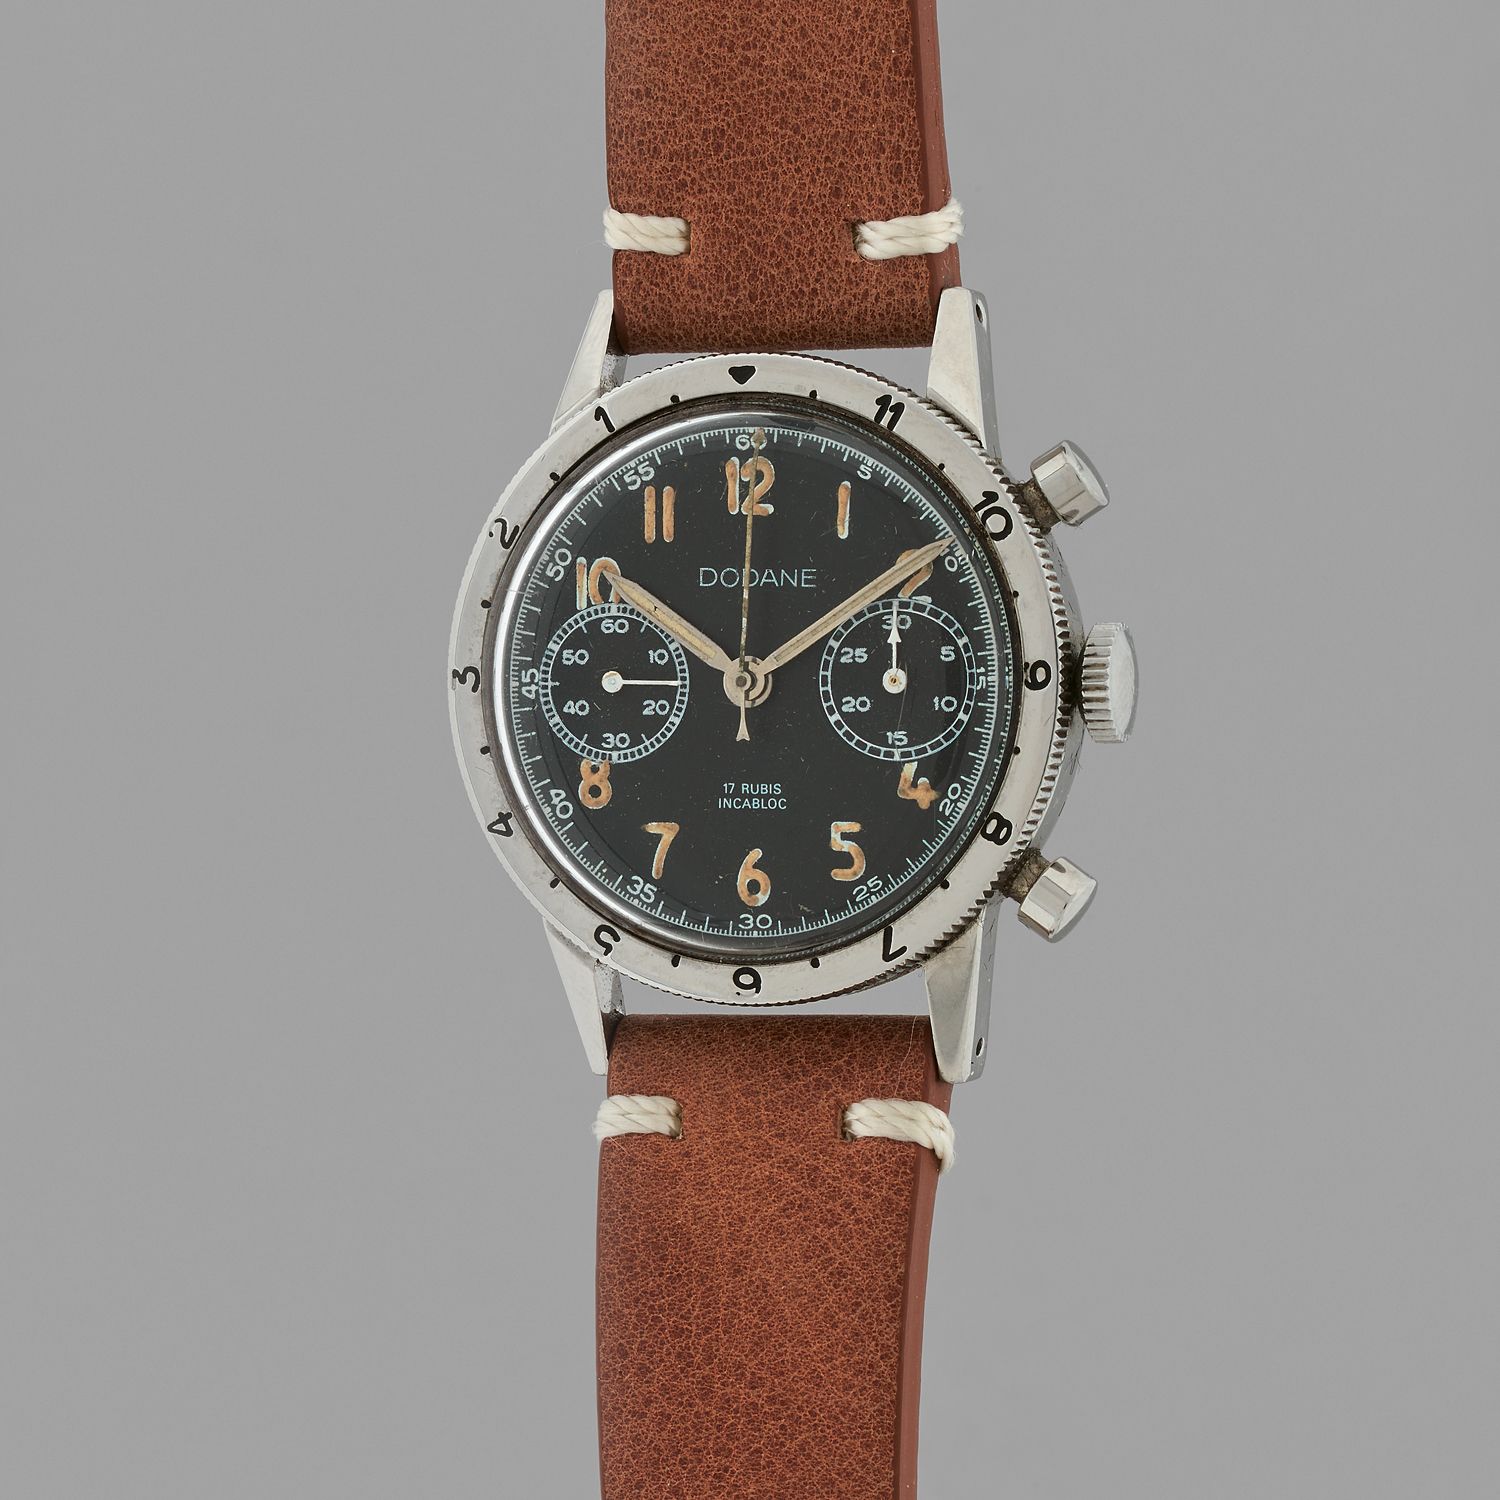 Null DODANE
TYPE XX. 
Circa: 1950.
Iconic chronograph of the French army. Equipp&hellip;